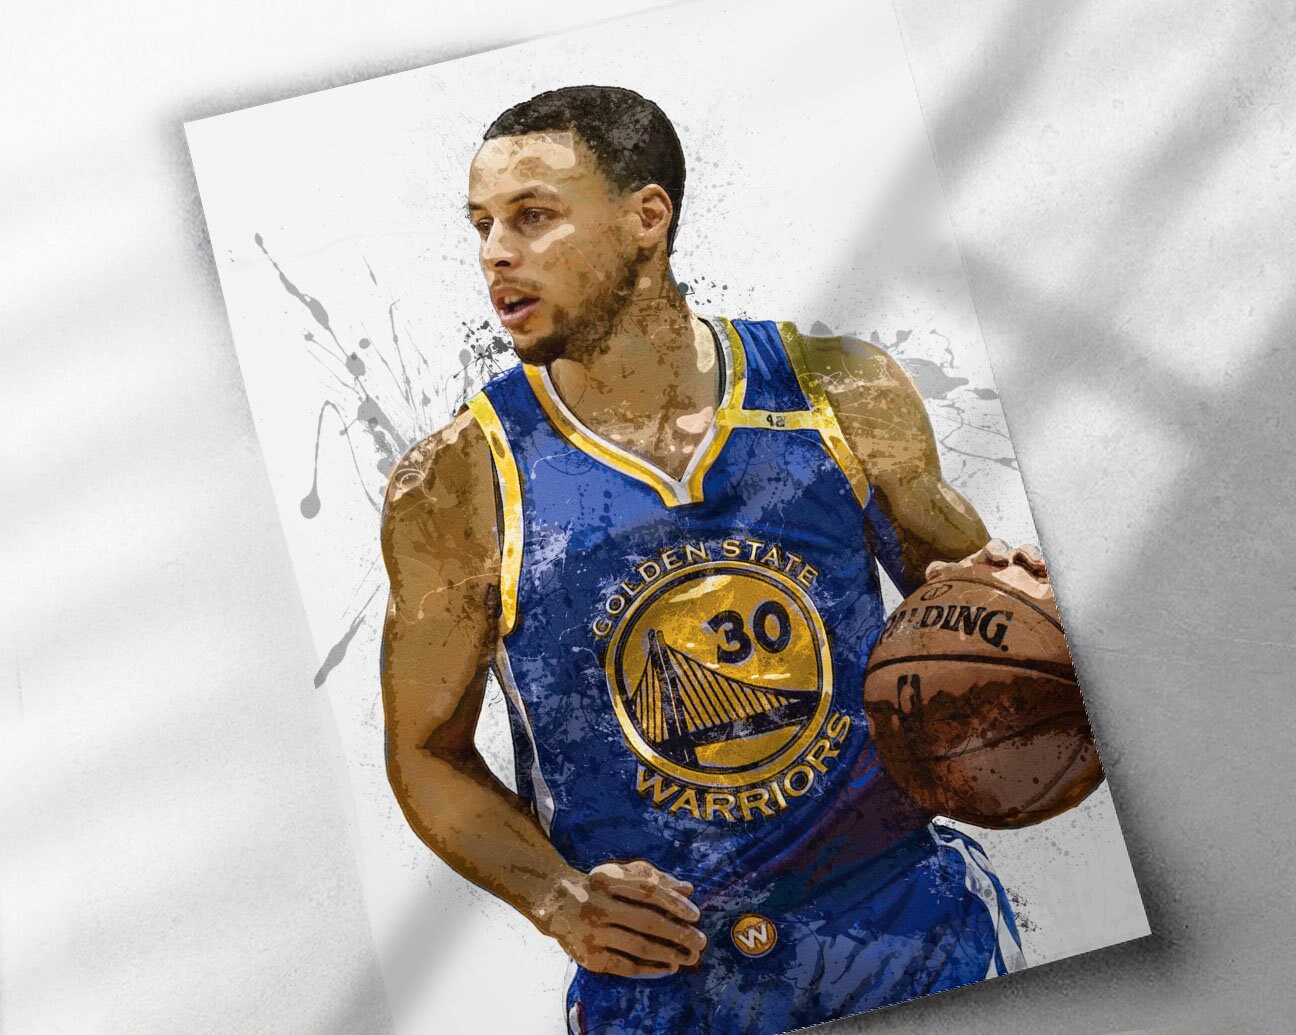 Stephen Curry Poster - Golden State Warriors - Canvas Print, Sports Framed Print, Basketball Poster, Kids Decor, Man Cave Gift, Wrap, Steph